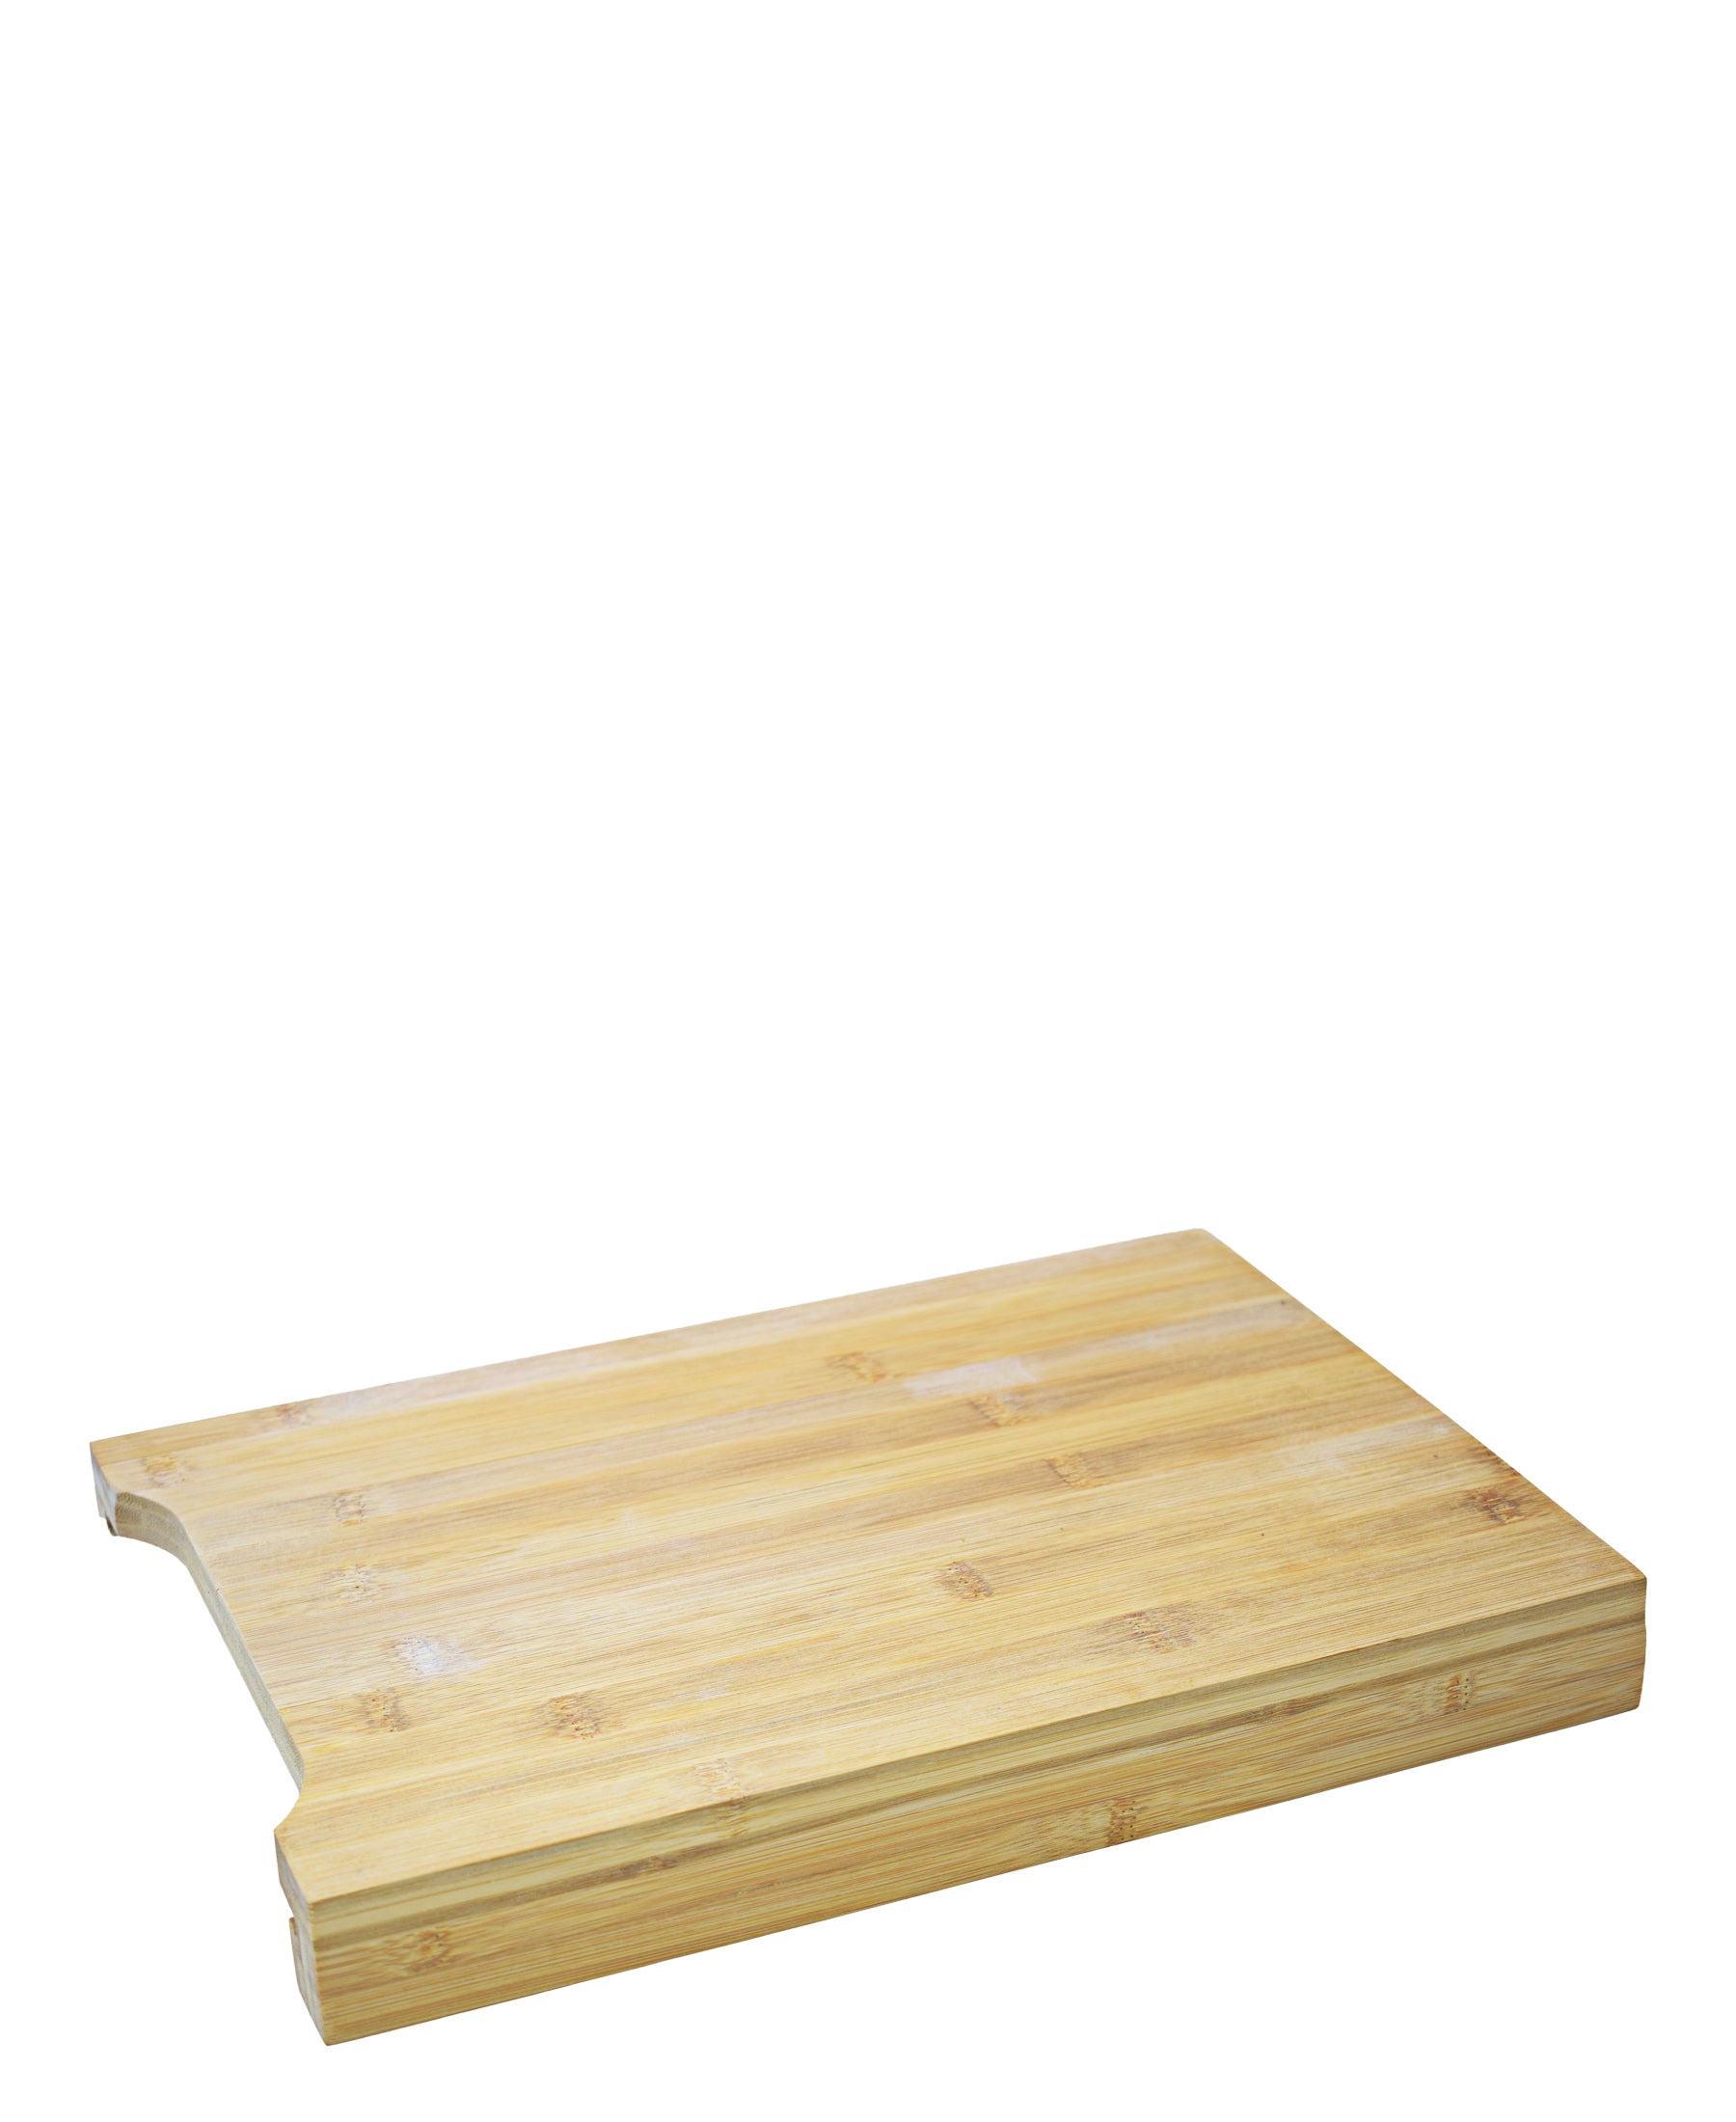 Excellent Houseware Cutting Board - Bamboo